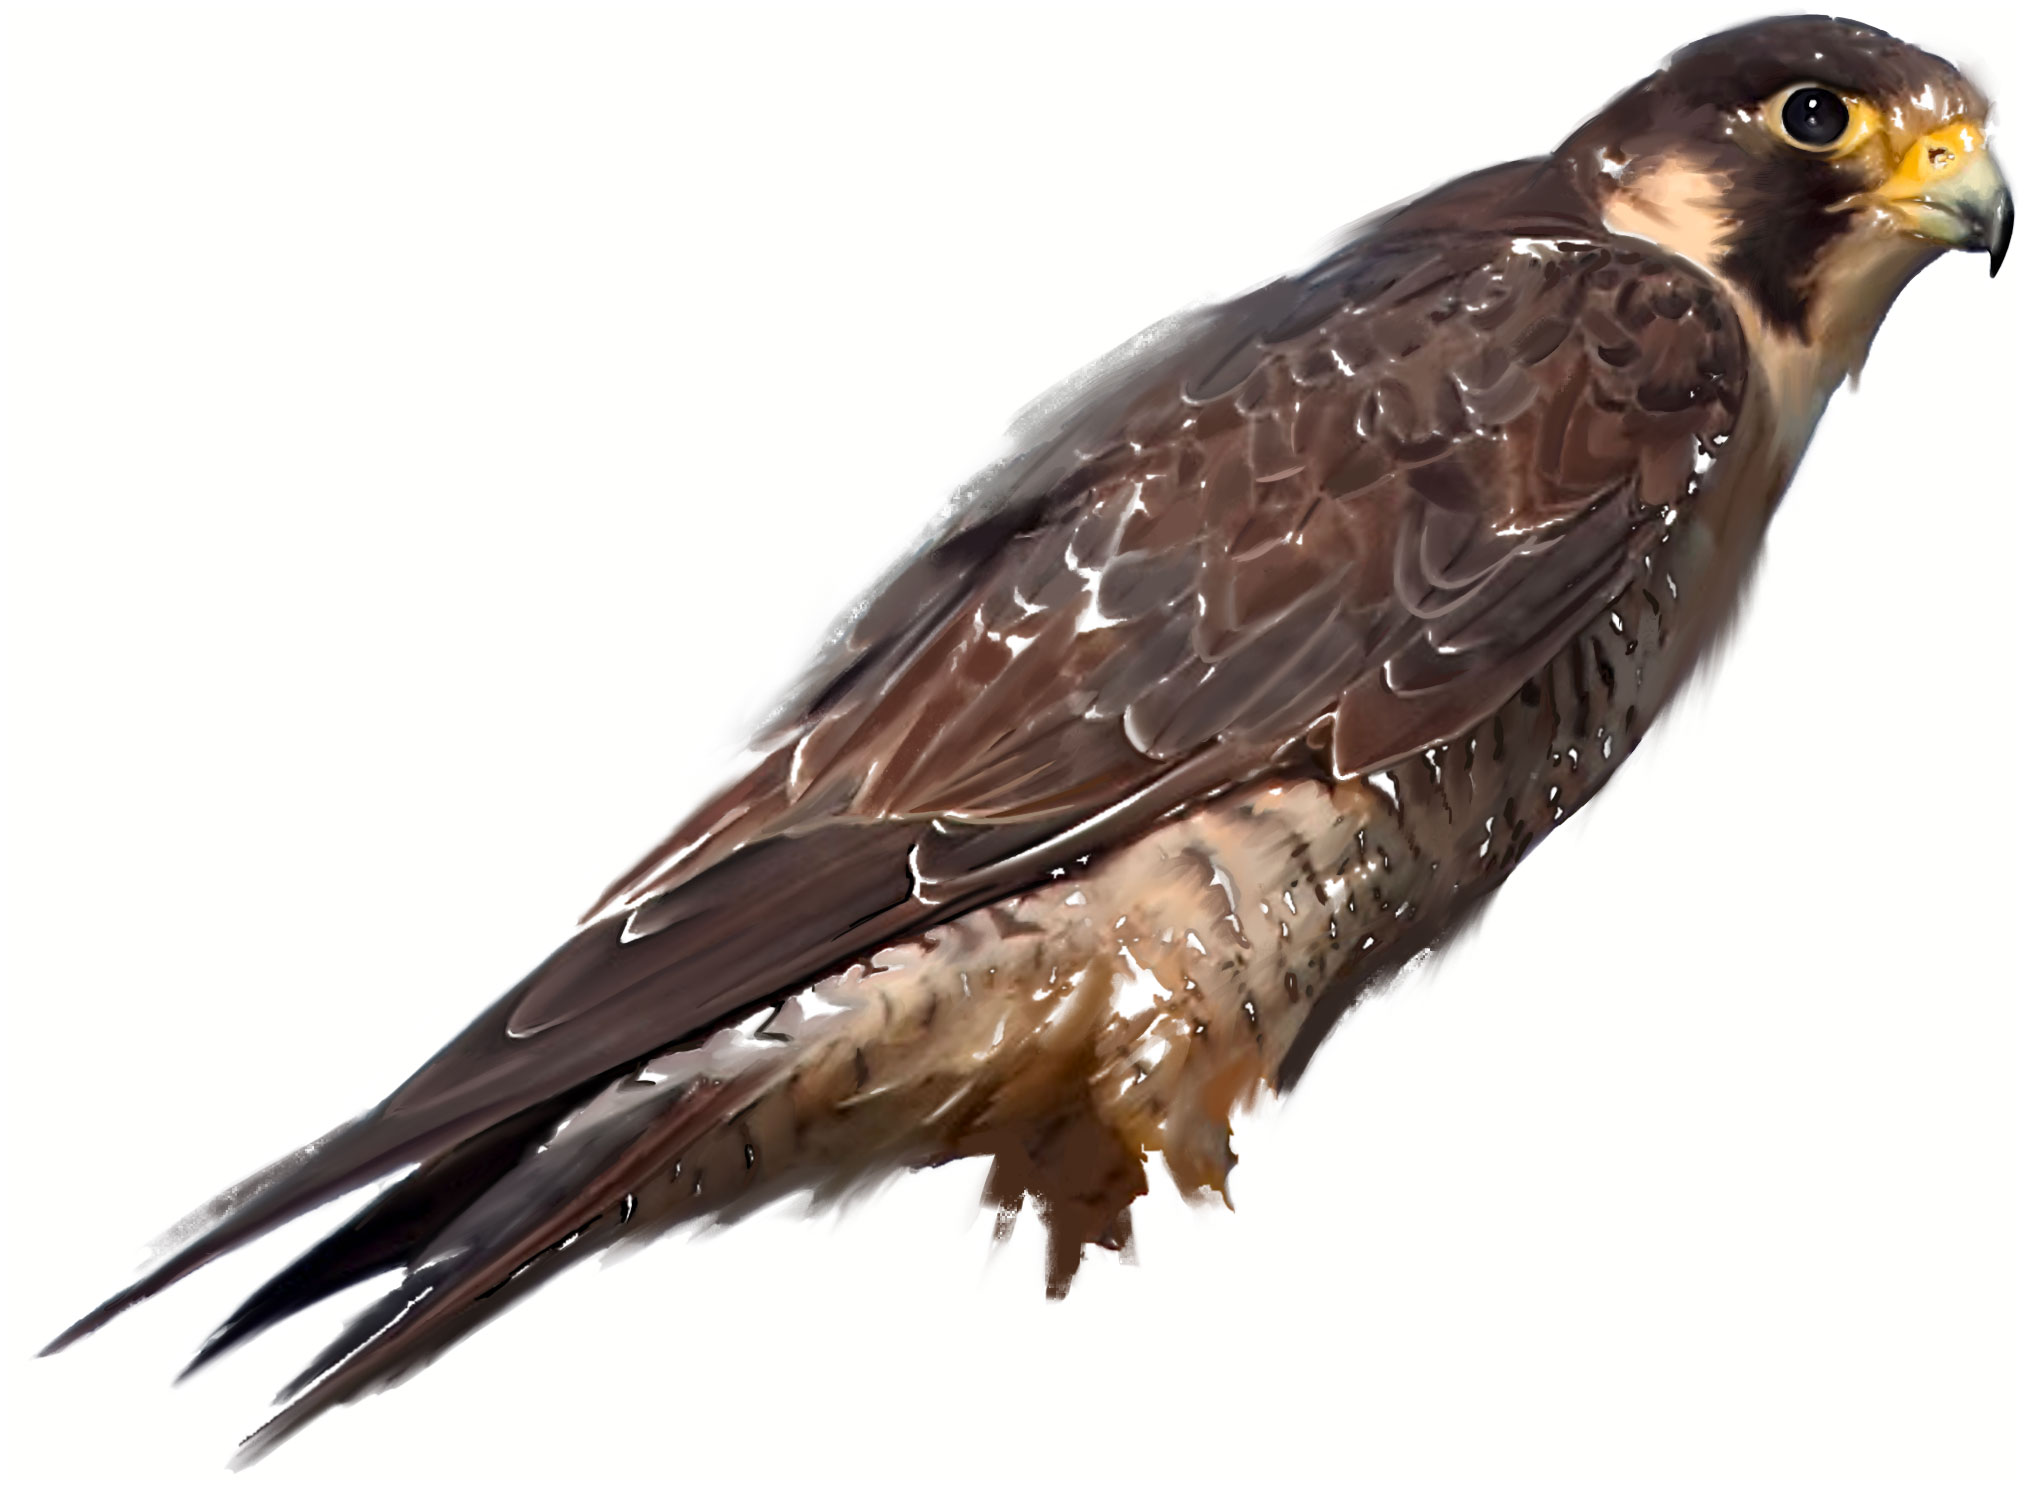 Painting of a Peregrine Falcon bird